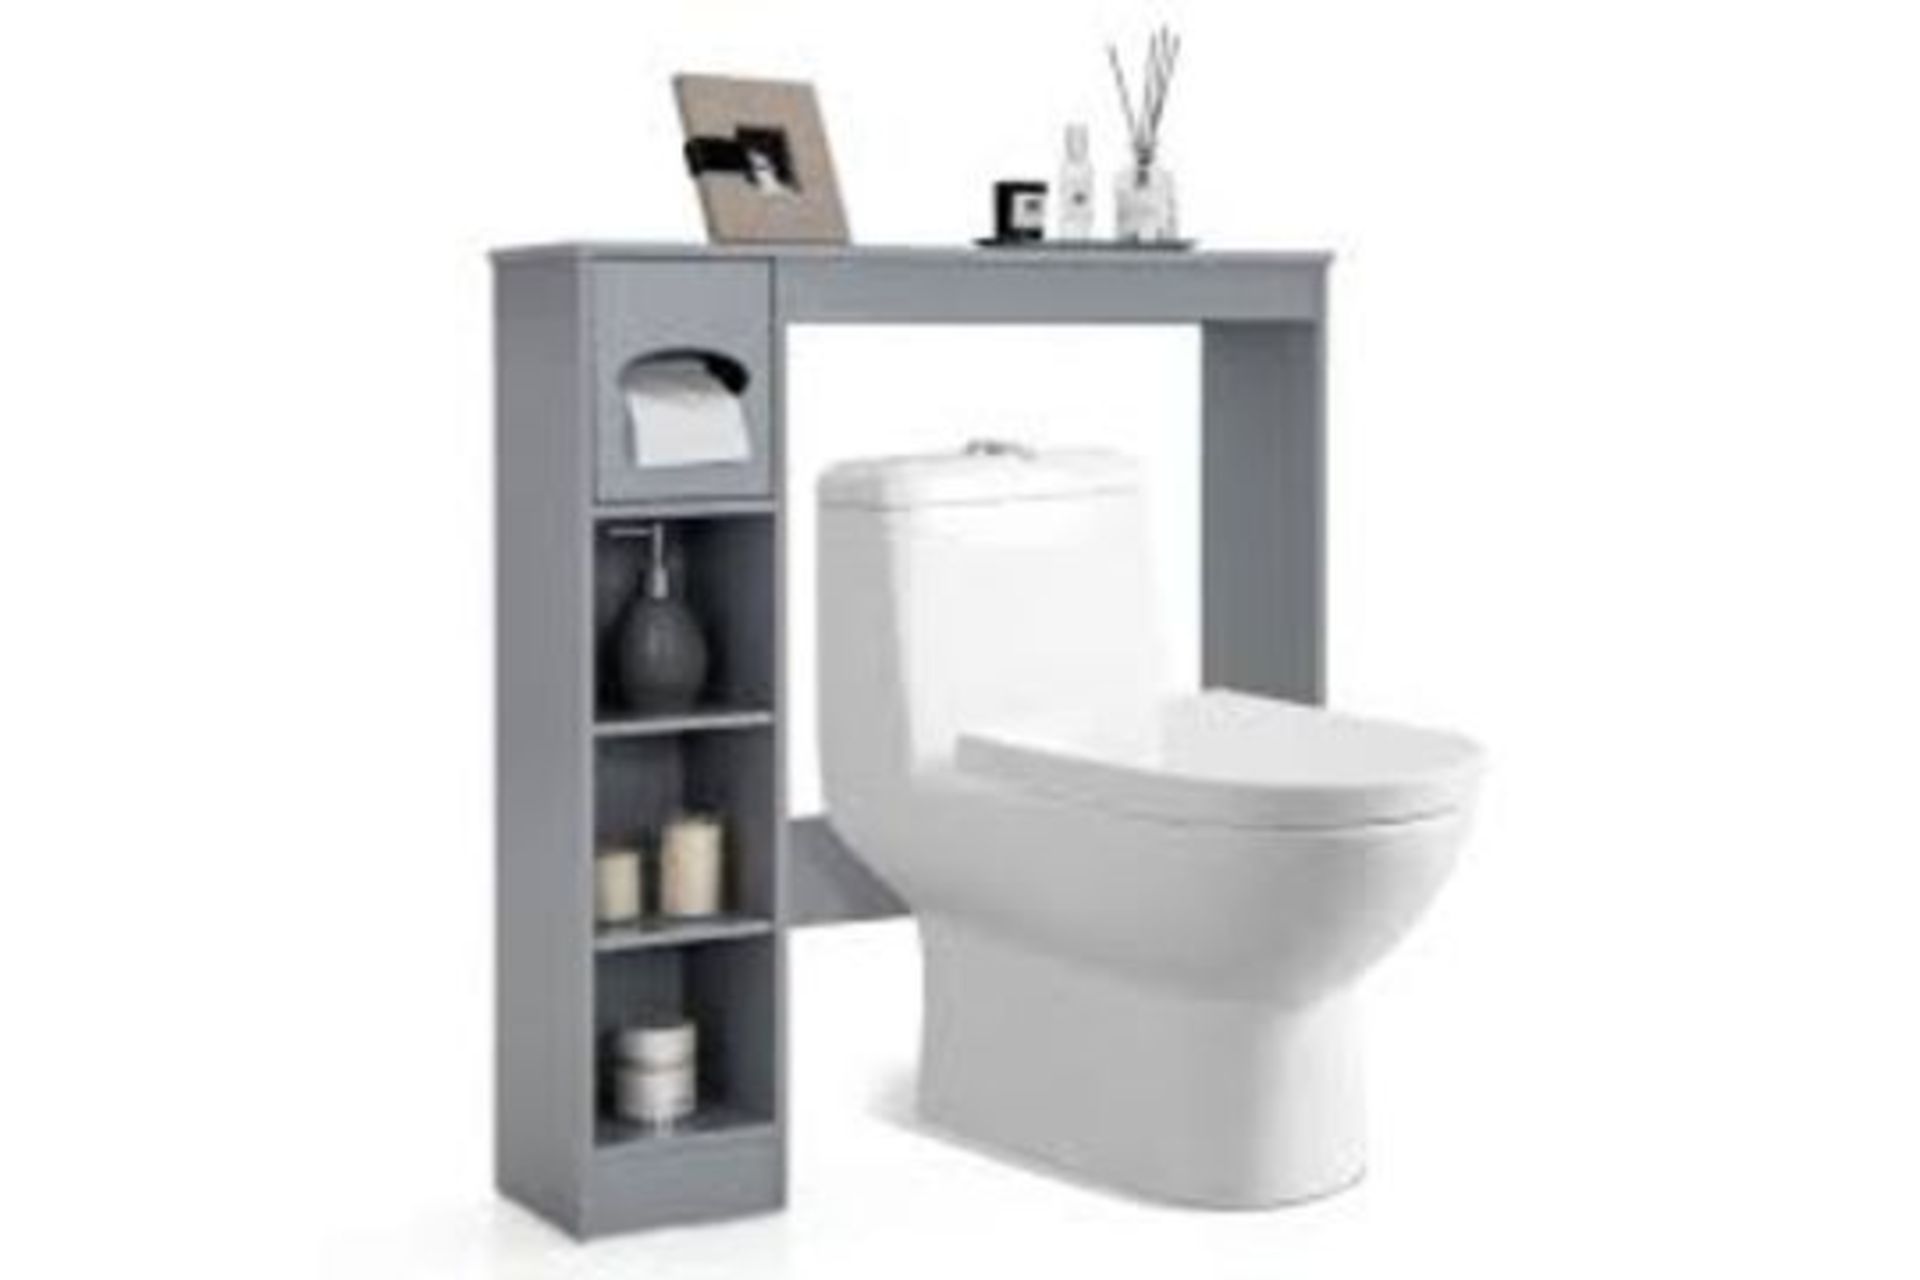 Freestanding Bathroom Space Saver with Toilet Paper Holder. - R14.16.. Featuring a unique over-the-